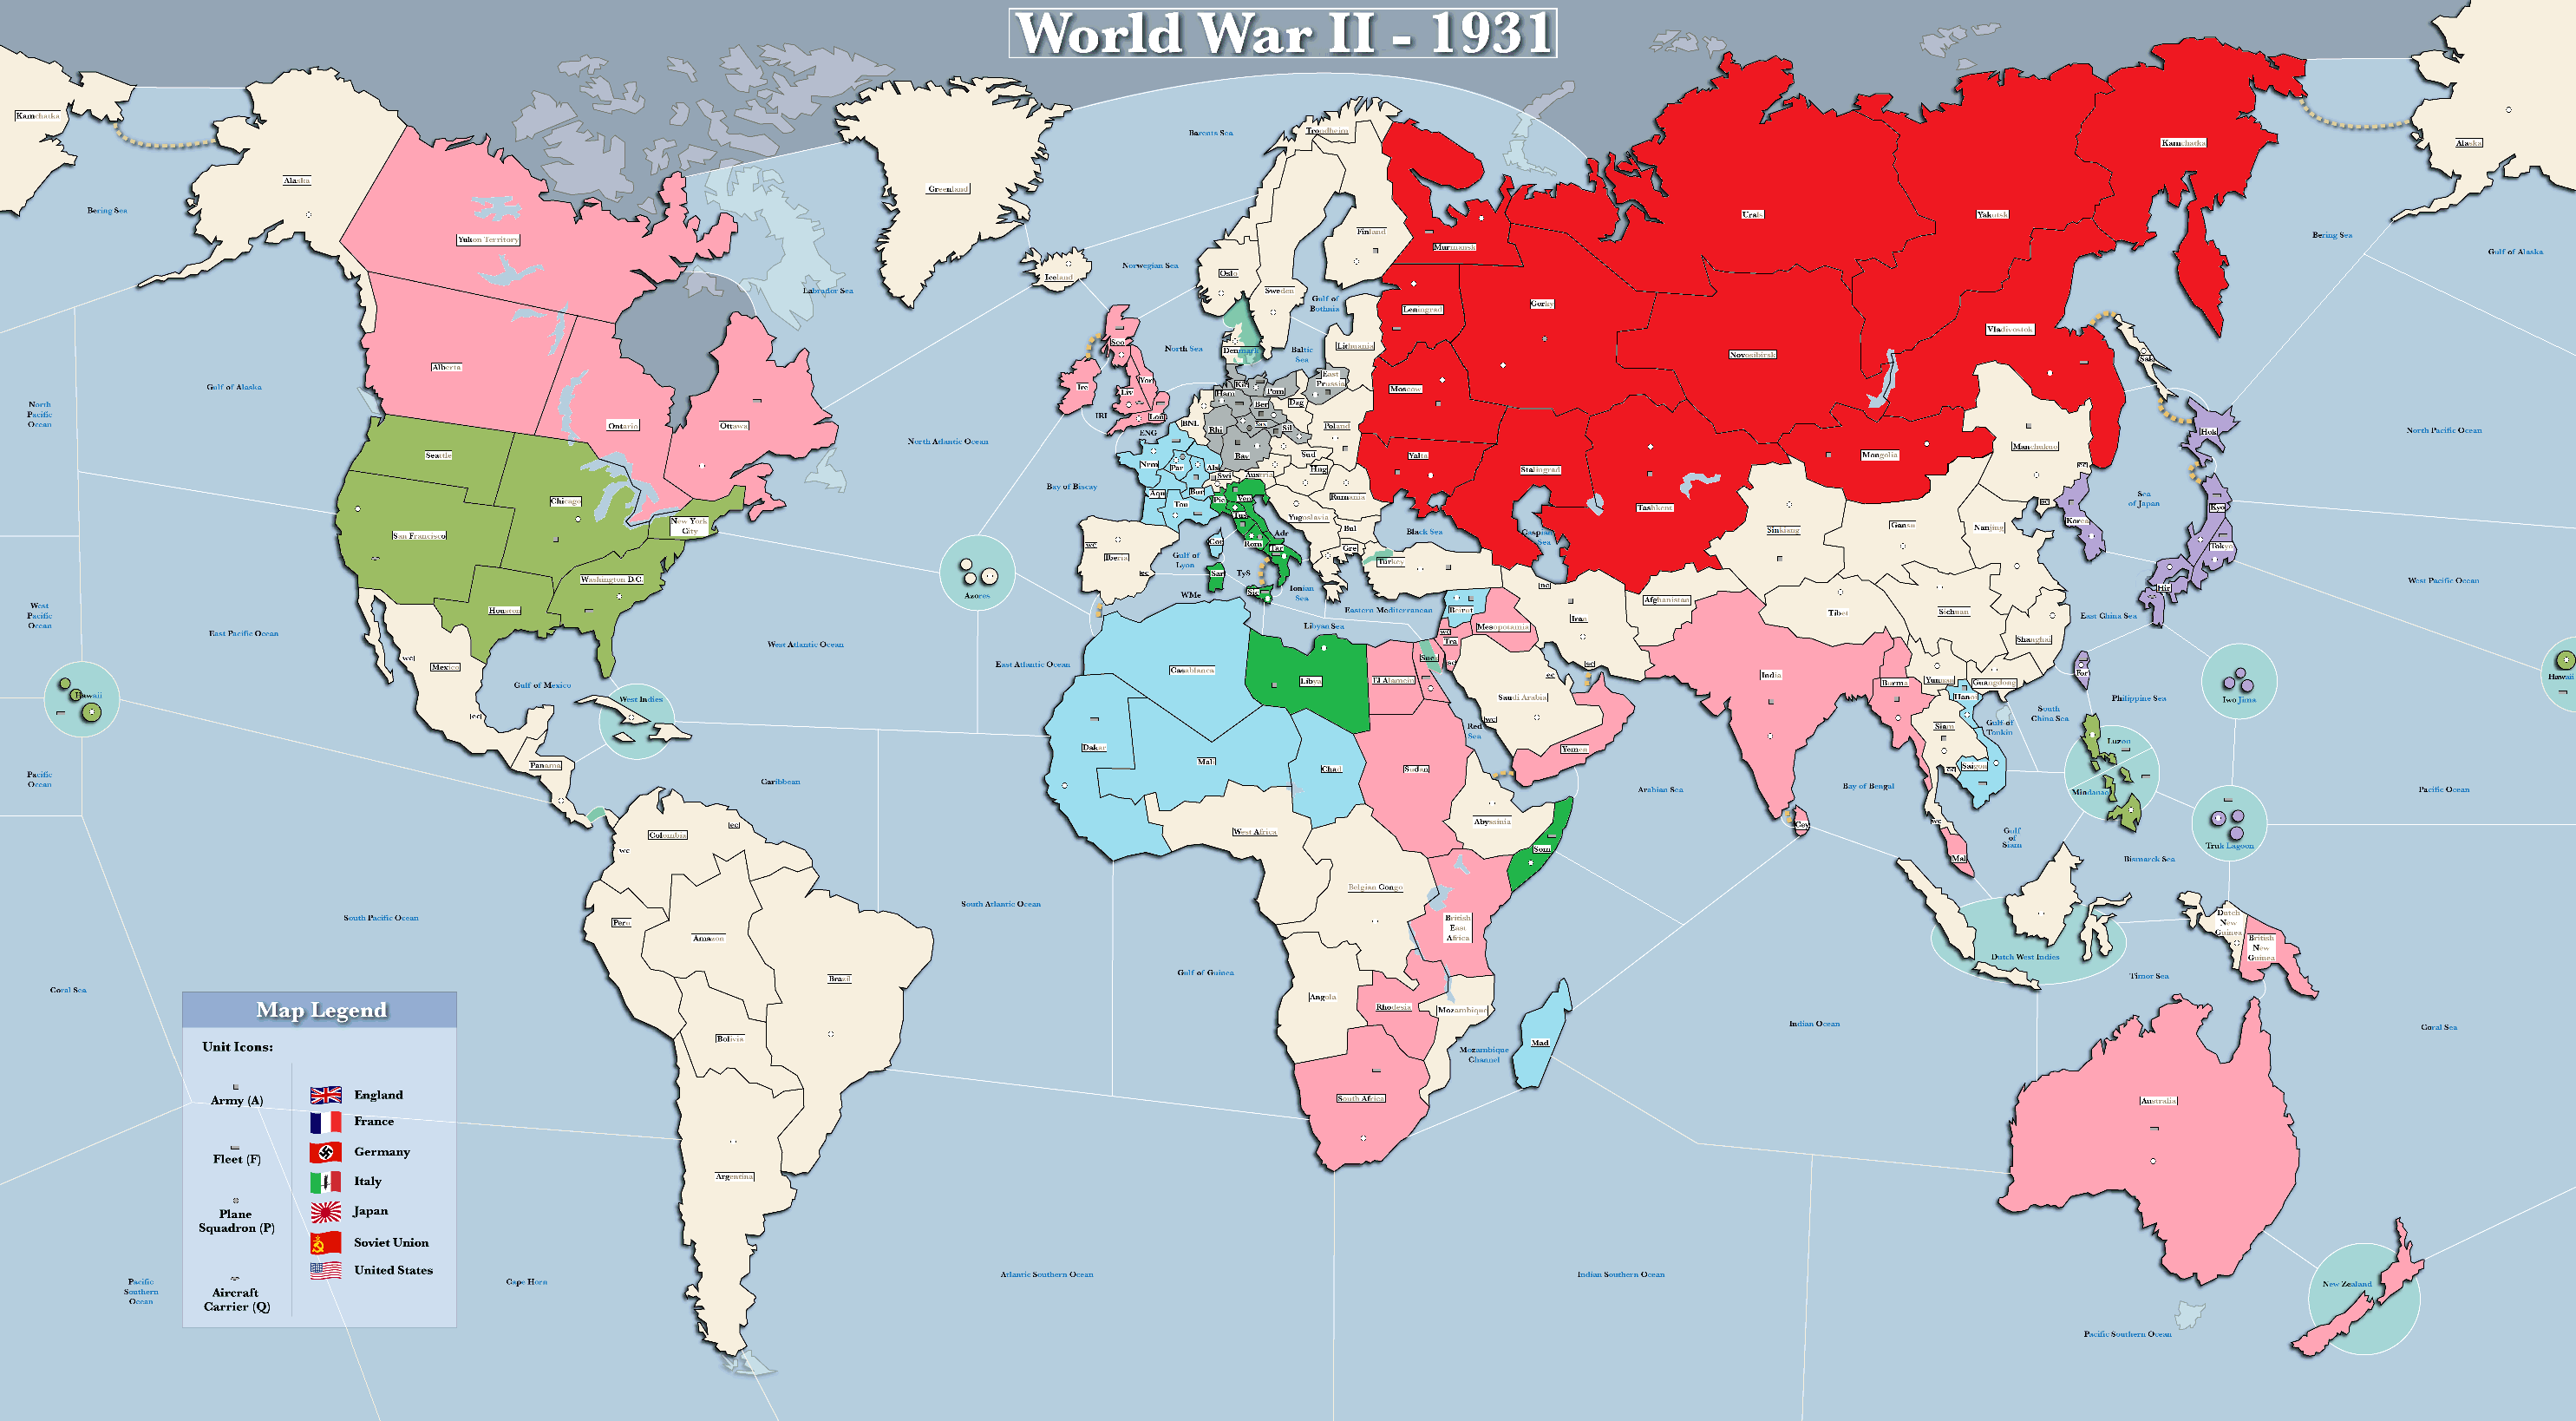 map of the world after ww2